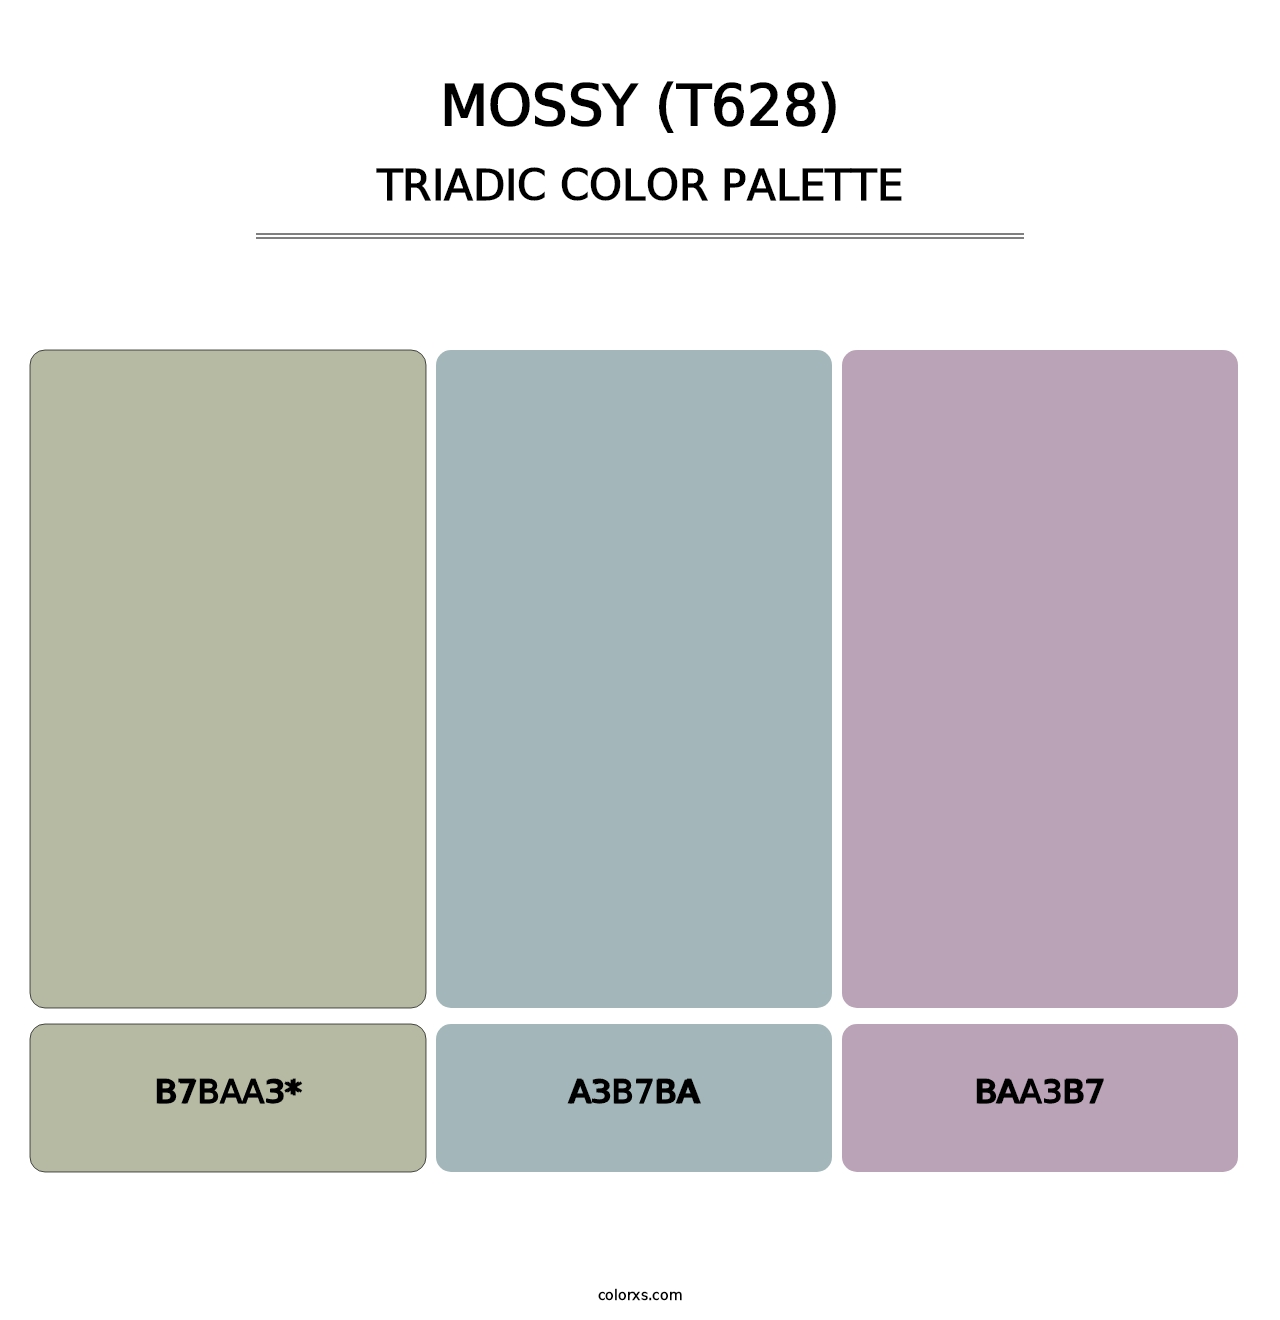 Mossy (T628) - Triadic Color Palette